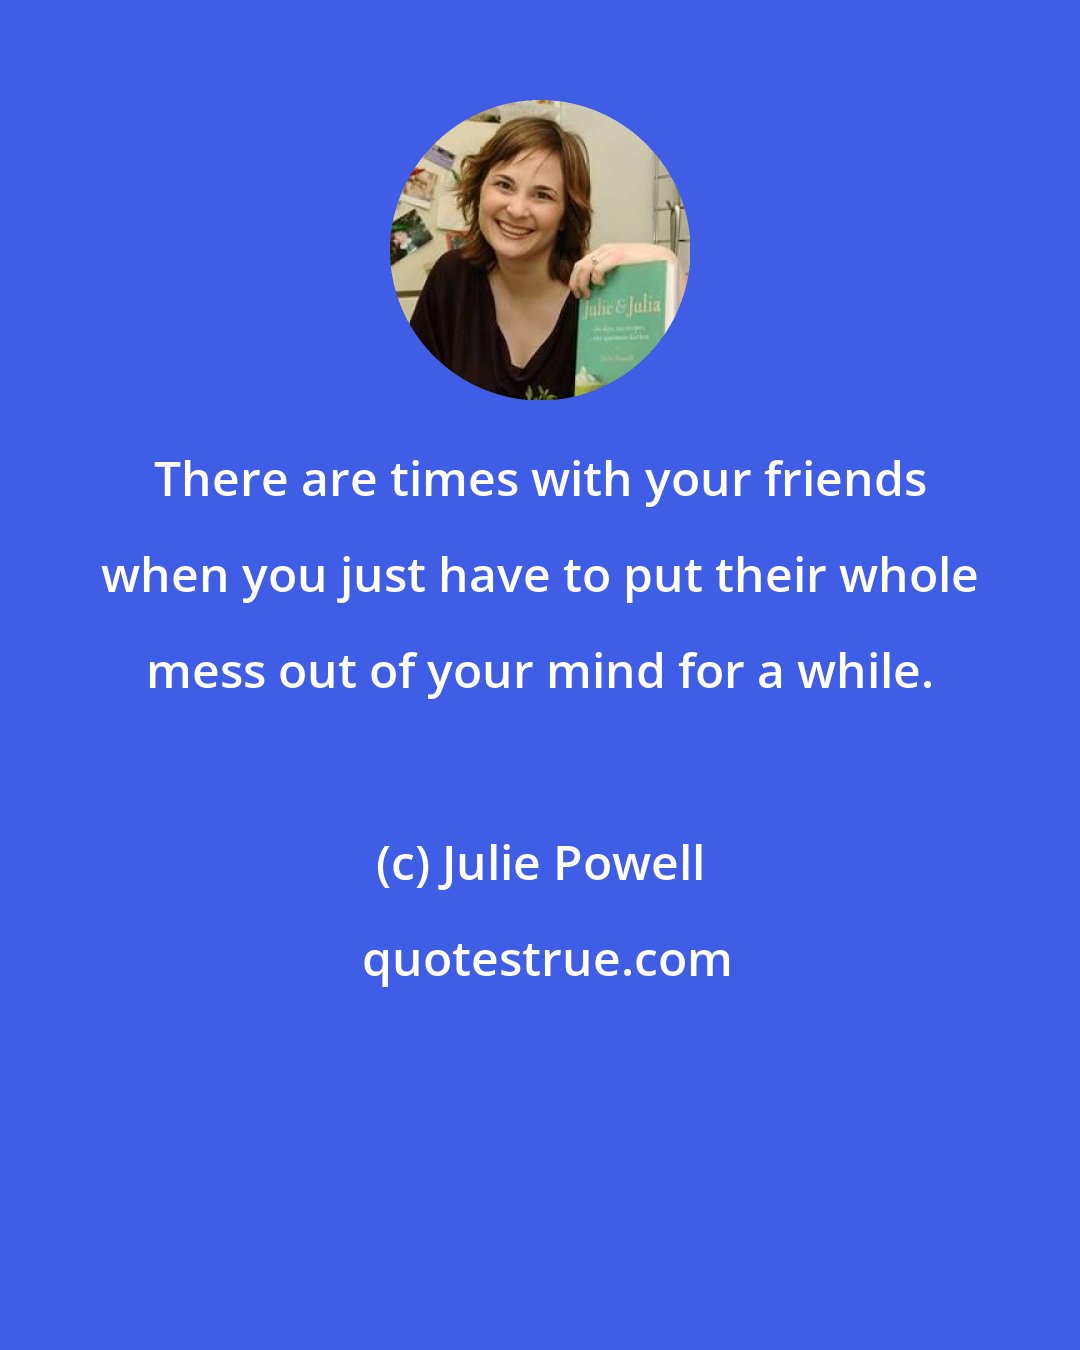 Julie Powell: There are times with your friends when you just have to put their whole mess out of your mind for a while.